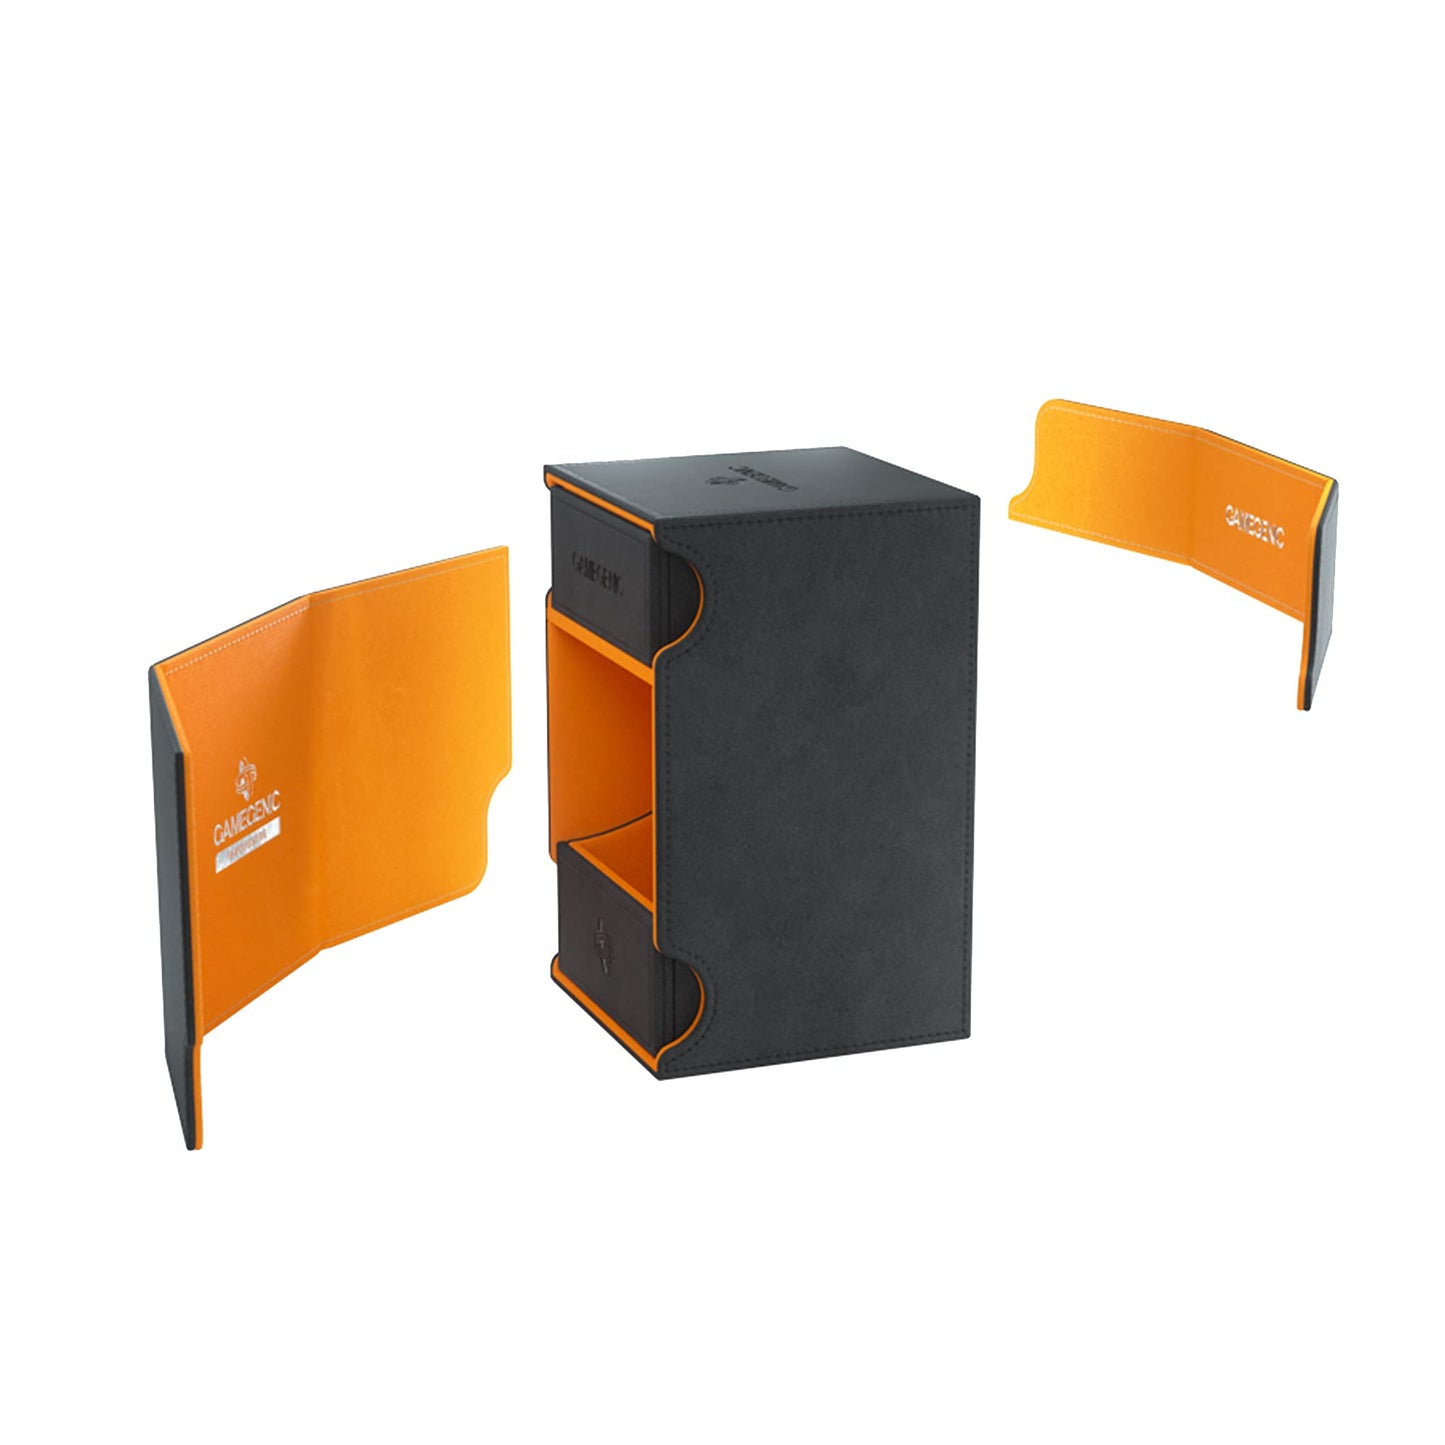 Gamegenic Watchtower 100+ XL Convertible Deck Box | Double-Sleeved Card Storage | Card Game Protector | Nexofyber Surface | Holds up to 100 Cards | Black and Orange Color | Made by Gamegenic